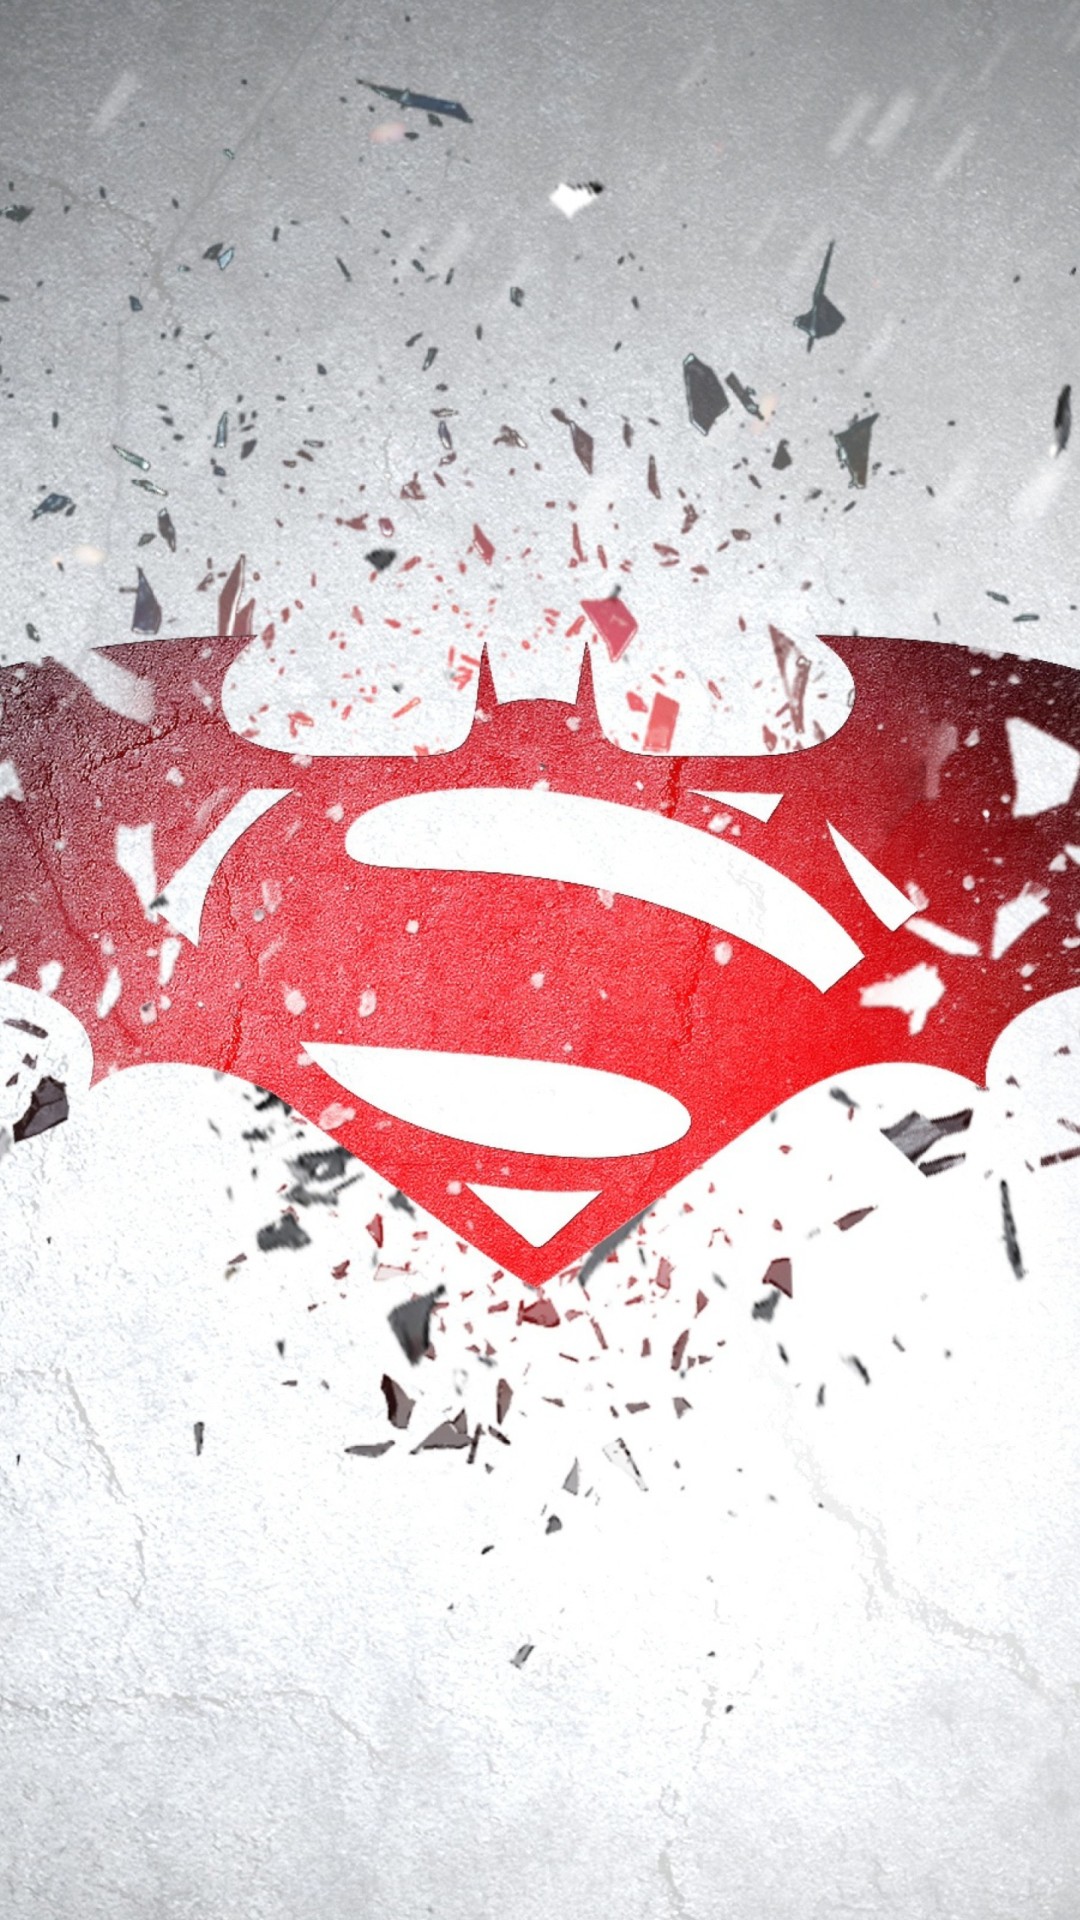 1080x1920 Superman Iphone Background Download Free.